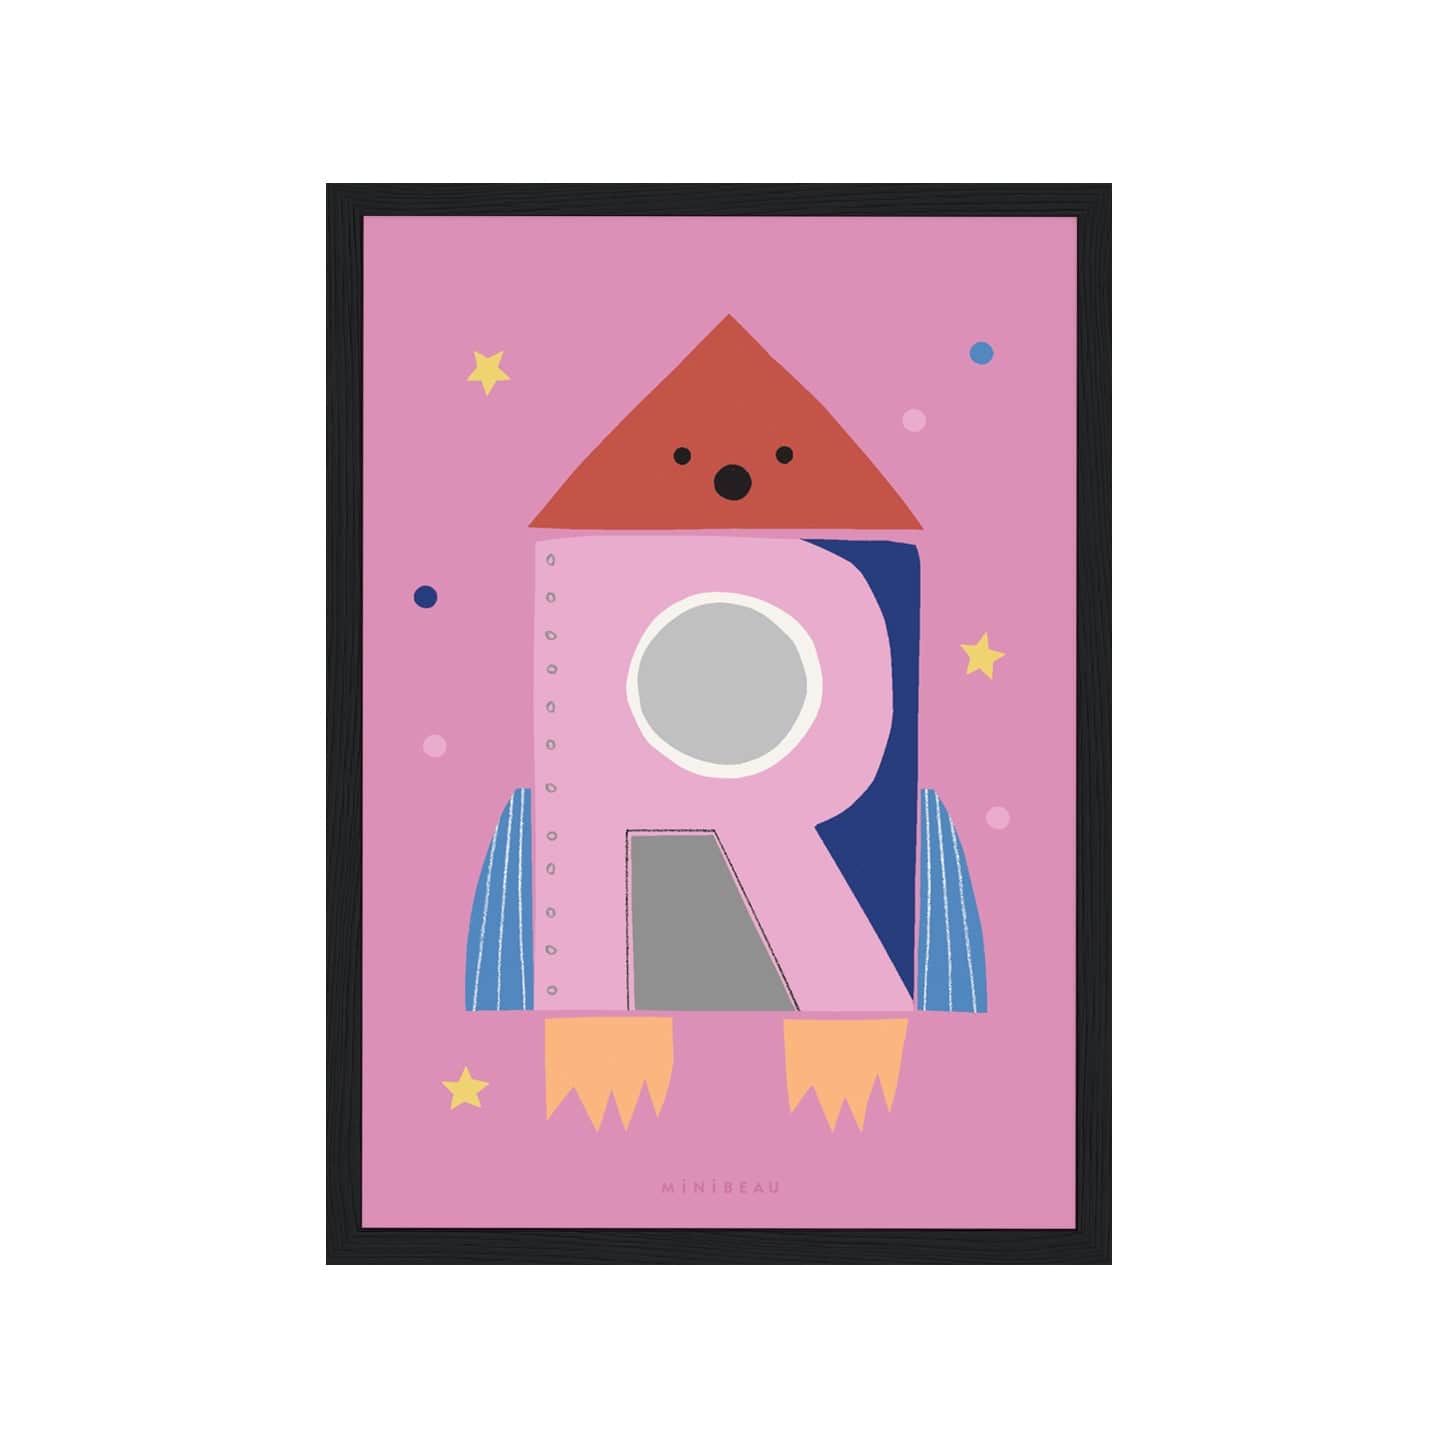 Art print in a black frame. Our Happy Alphabet 'R' Art Print shows a shocked rocket lasting of to space with a large pink R on it creating a porthole. On a pink background with coloured dots and yellow stars.